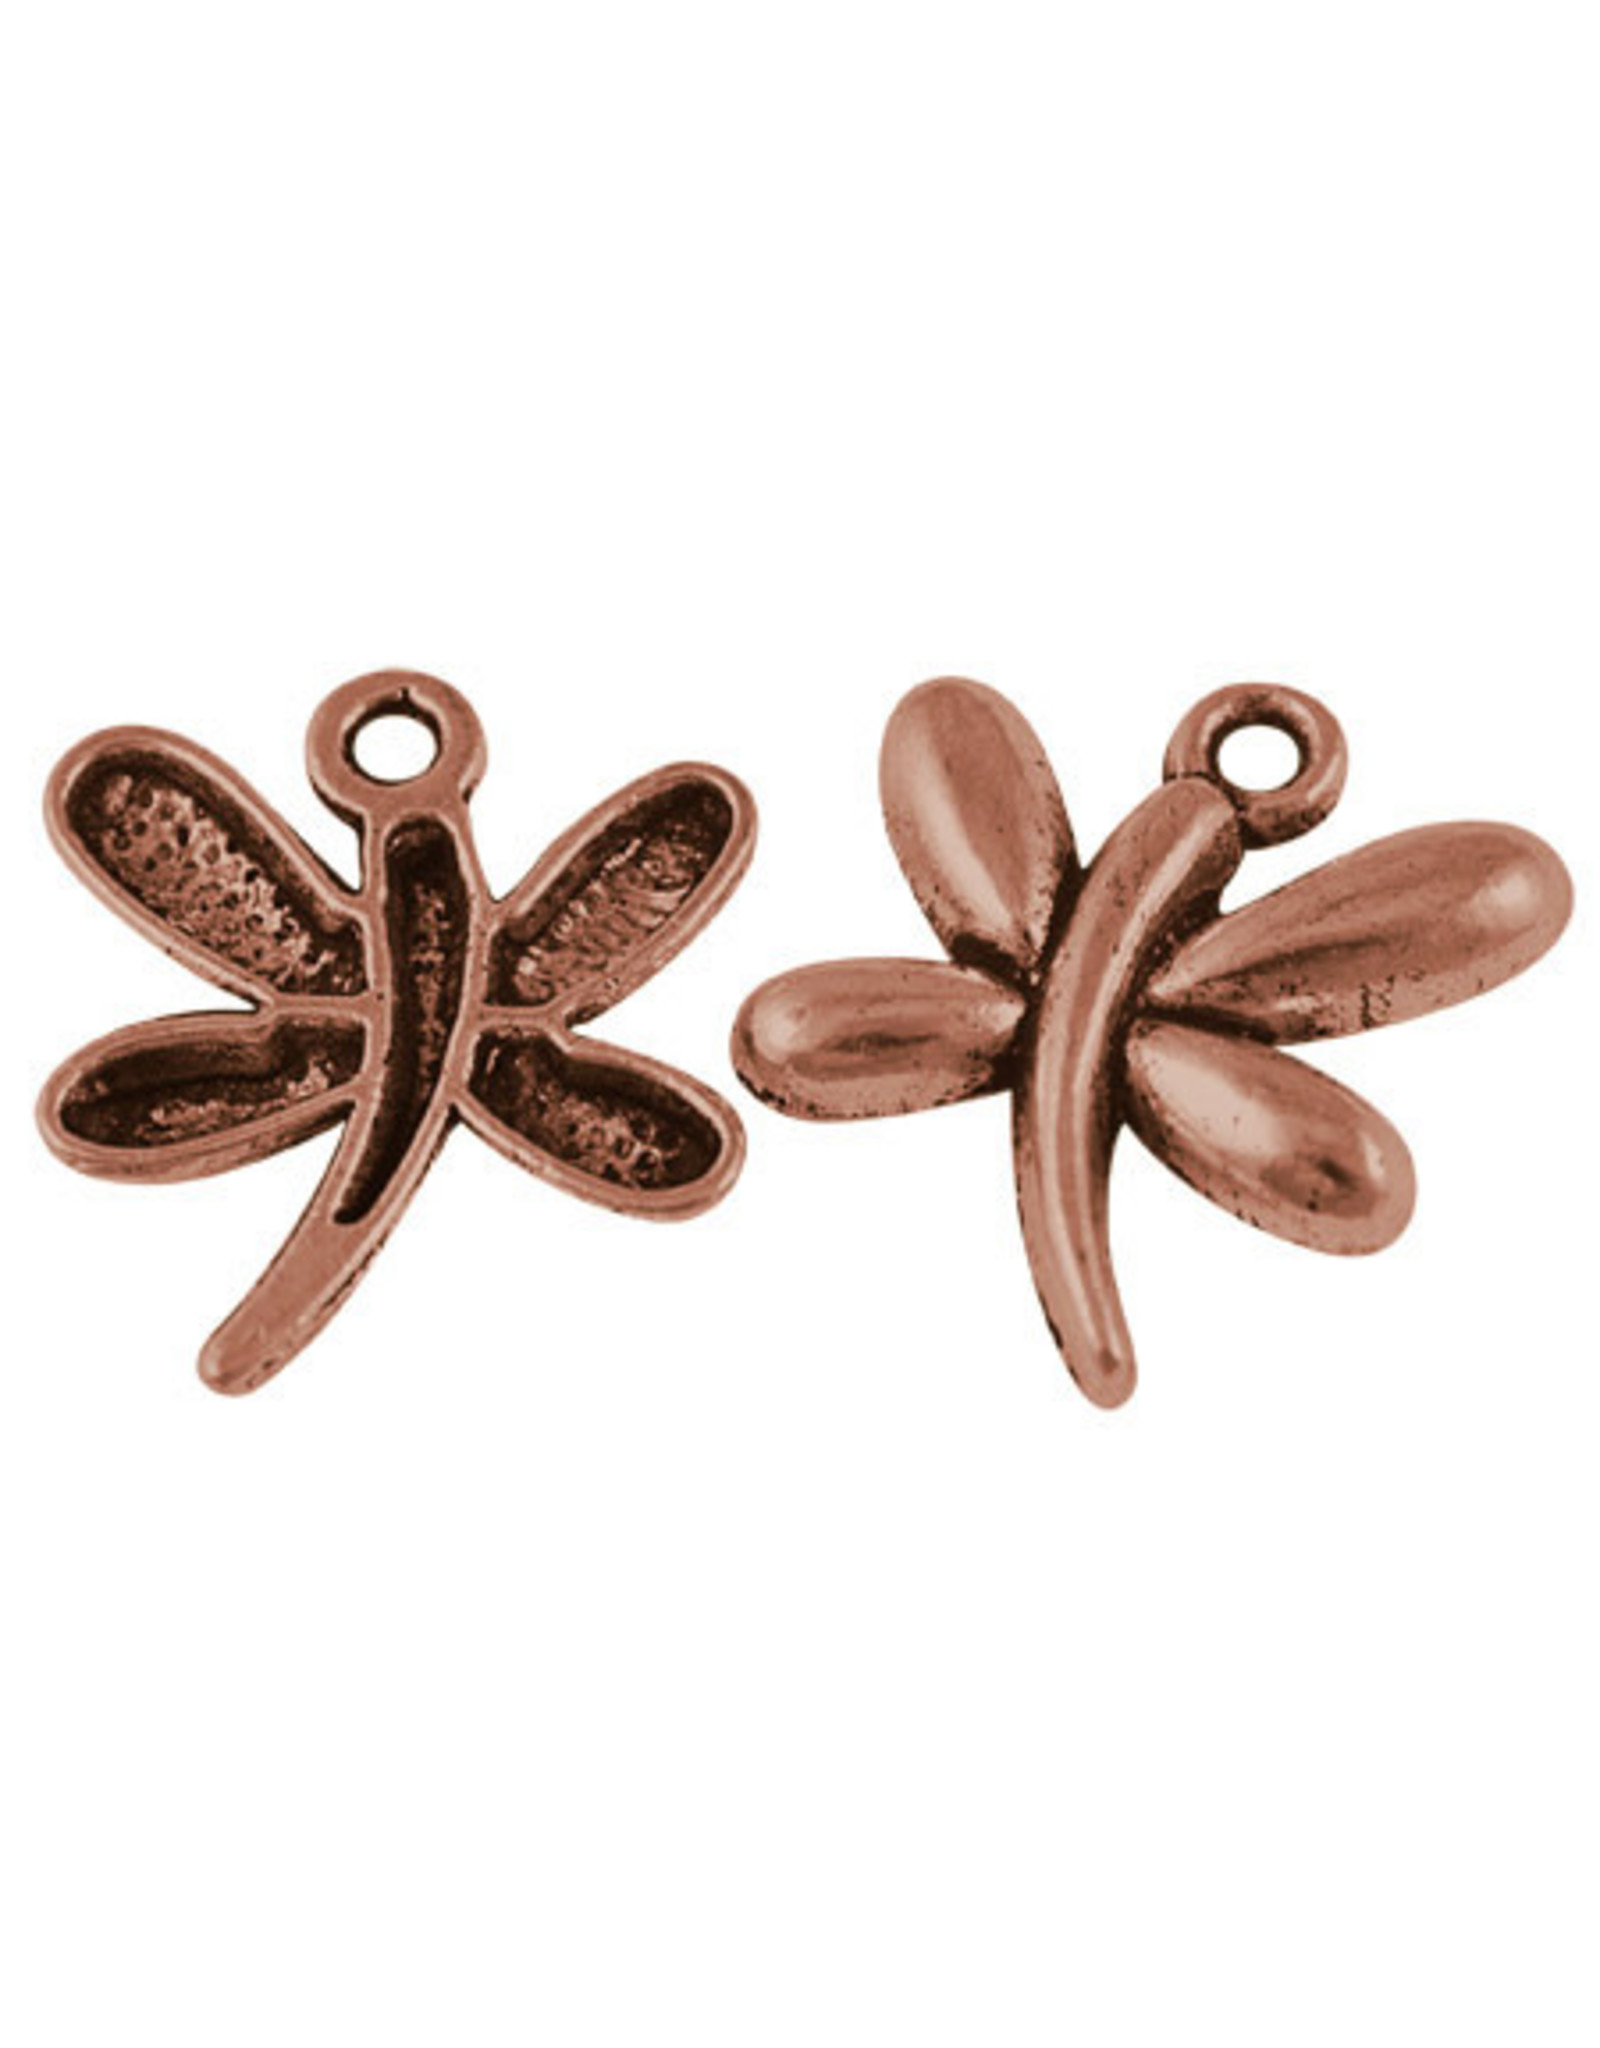 Polished Copper & Brass Dragonfly Spike